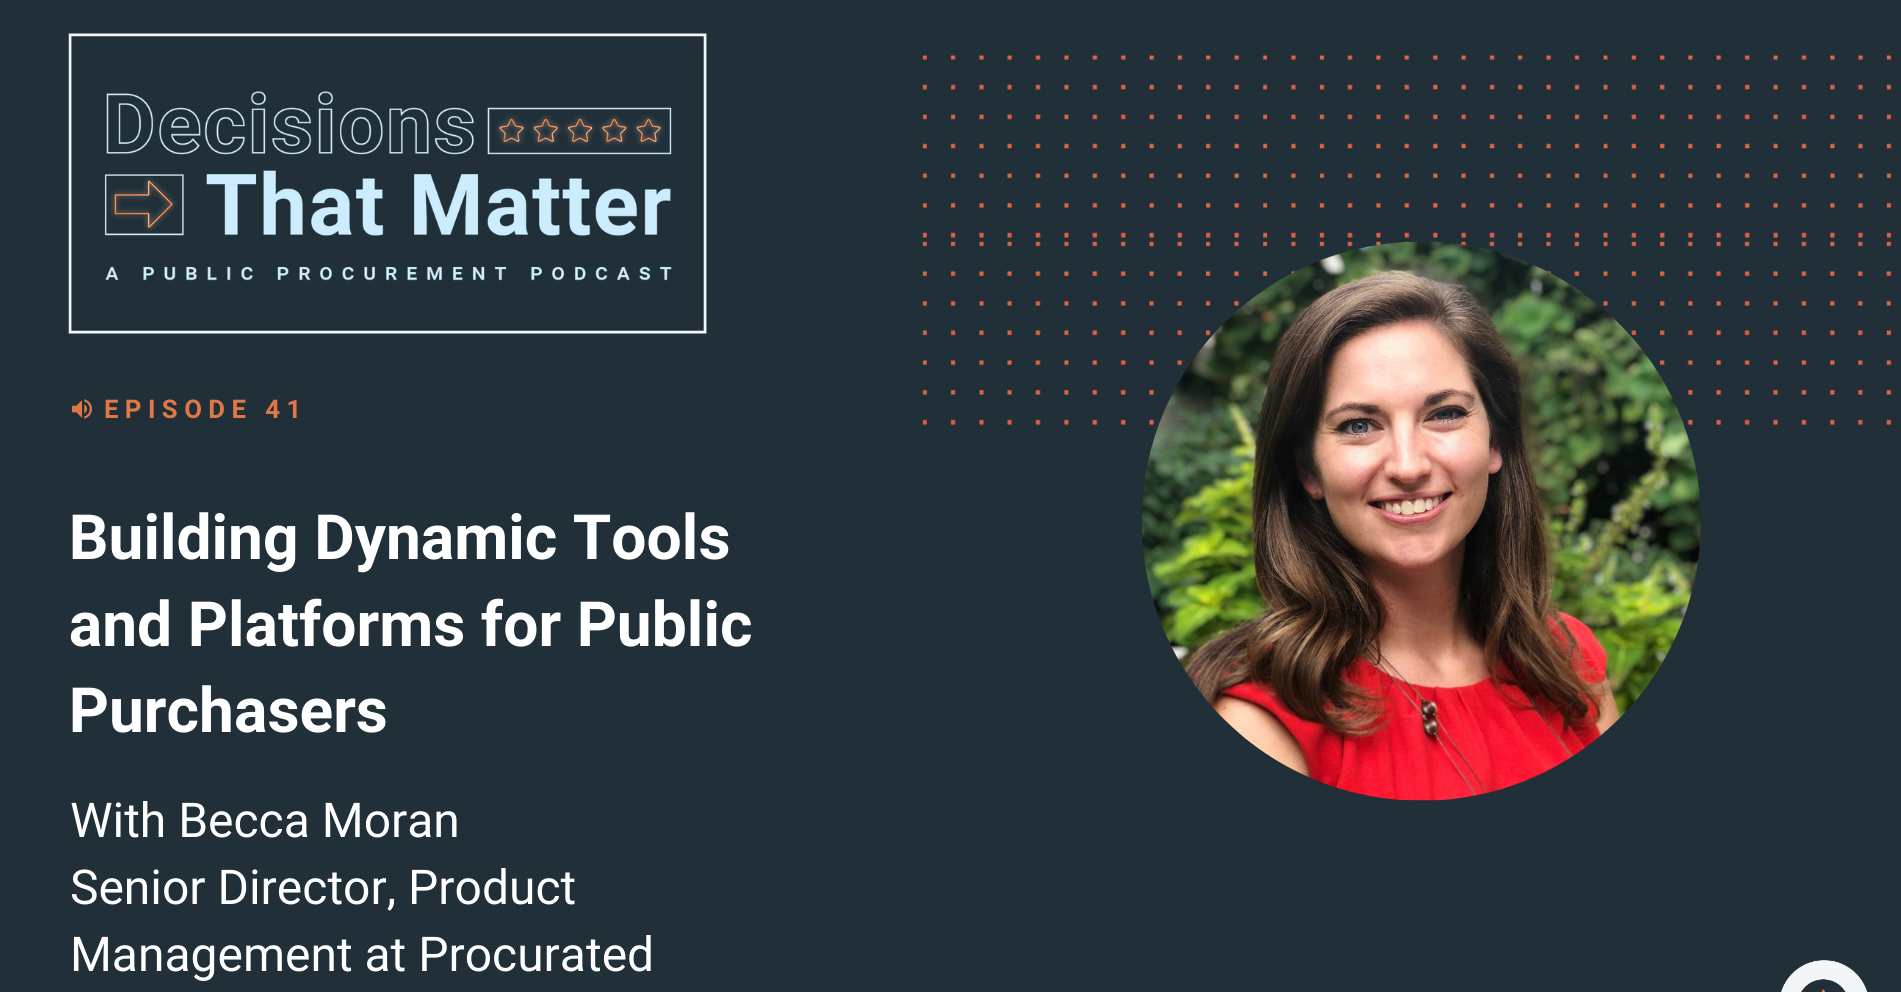 Building Dynamic Tools and Platforms for Public Purchasers w/ Becca Moran